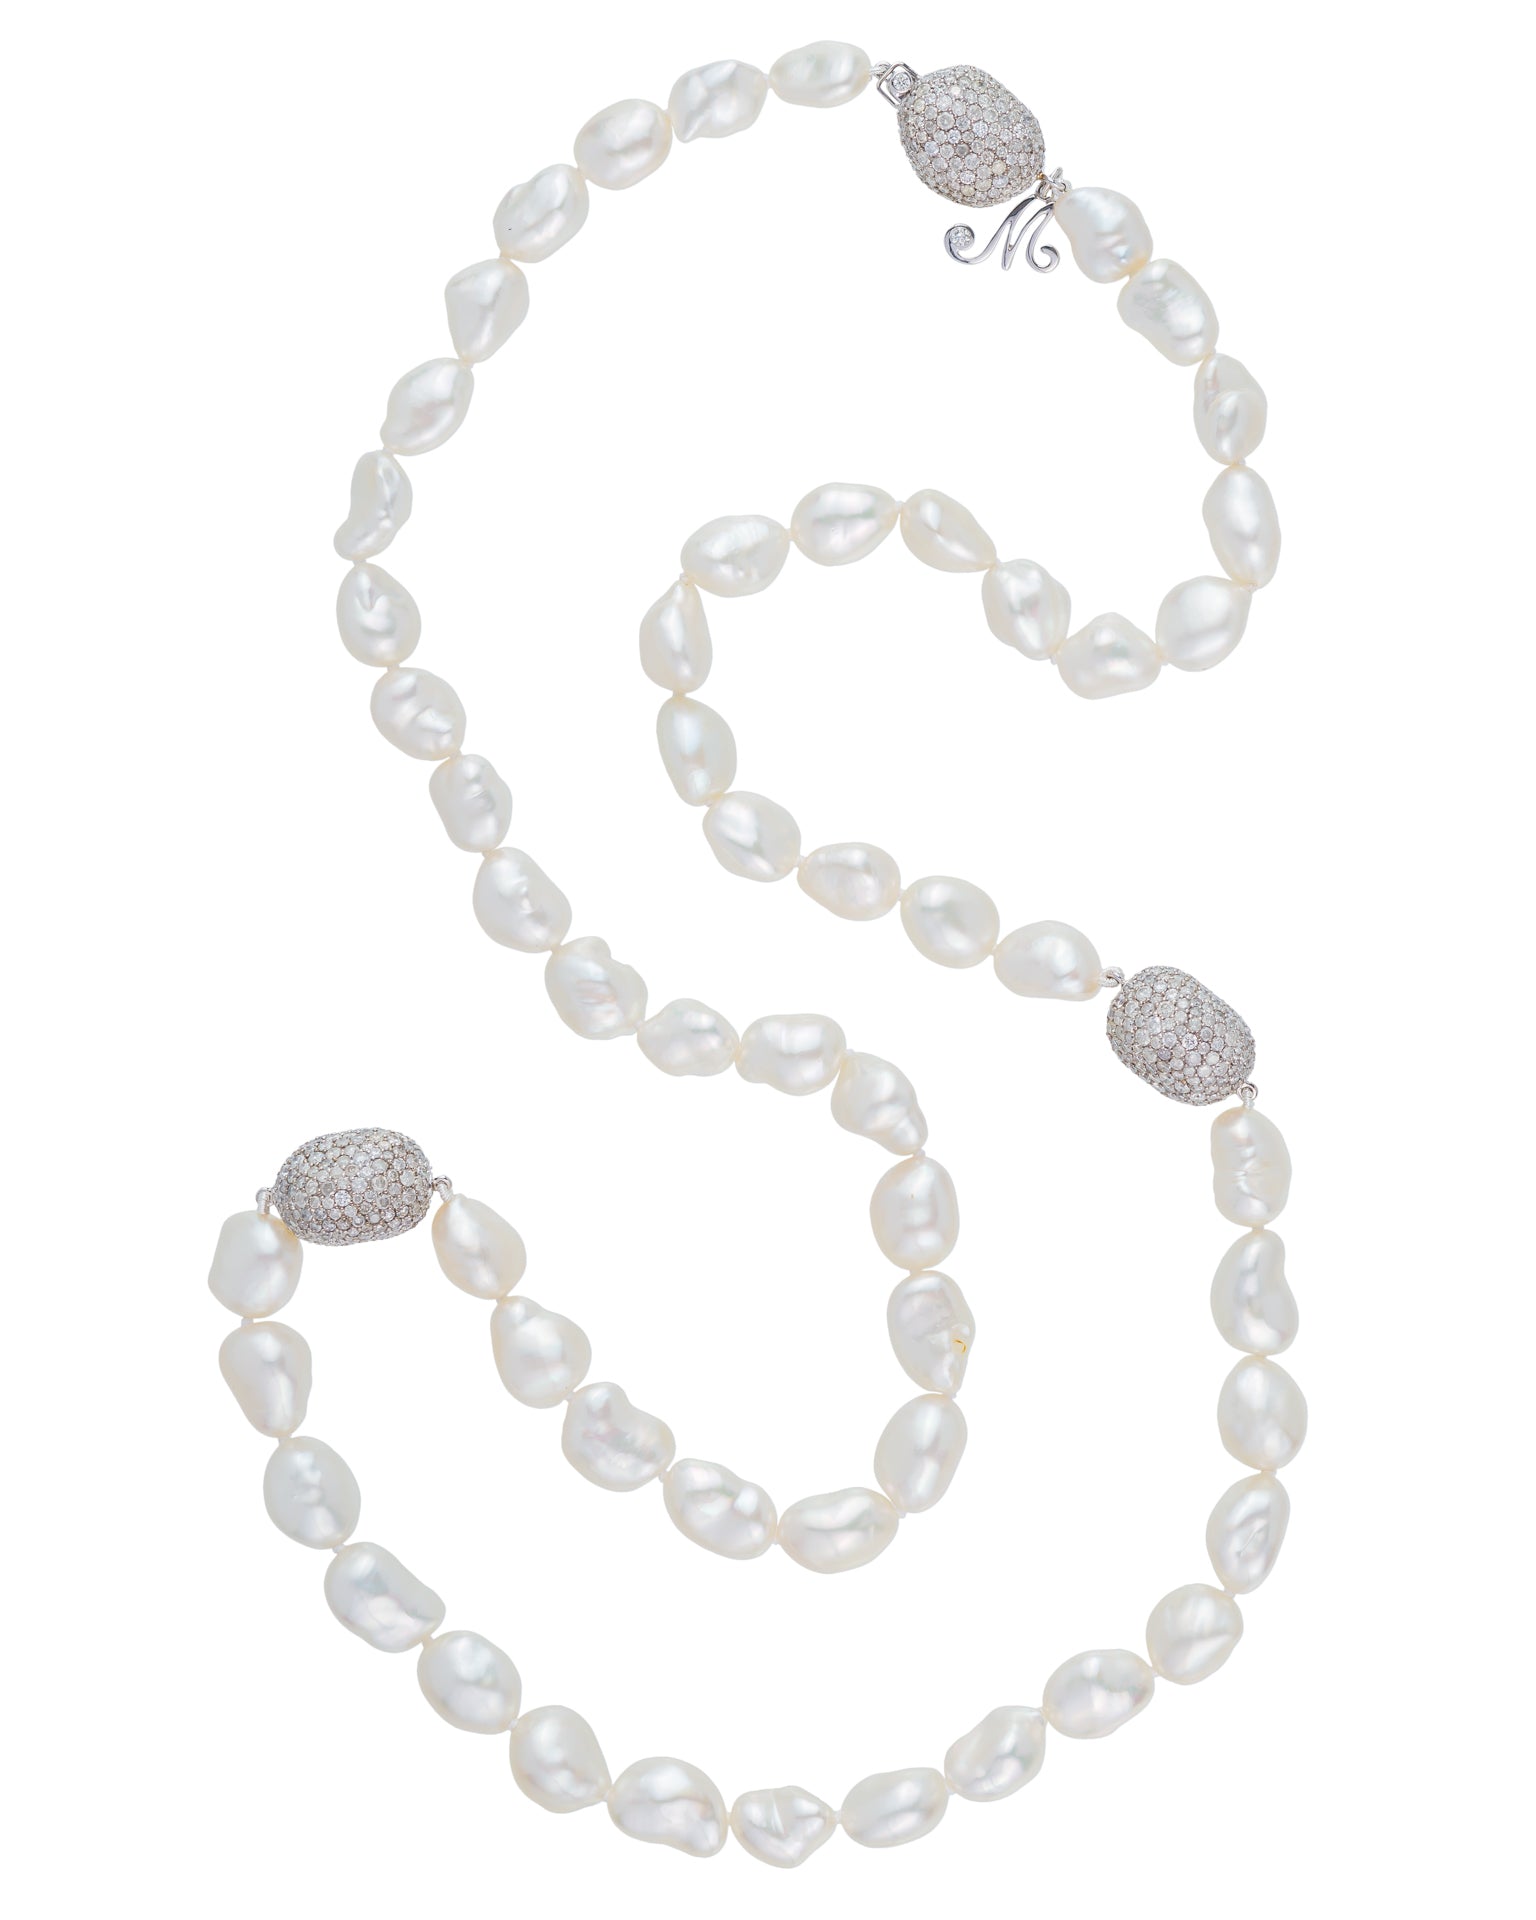 South Sea Keshi pearl necklace featuring South Sea Keshi pearls with 'pebbles' set in with diamonds, crafted in 18 karat white gold.